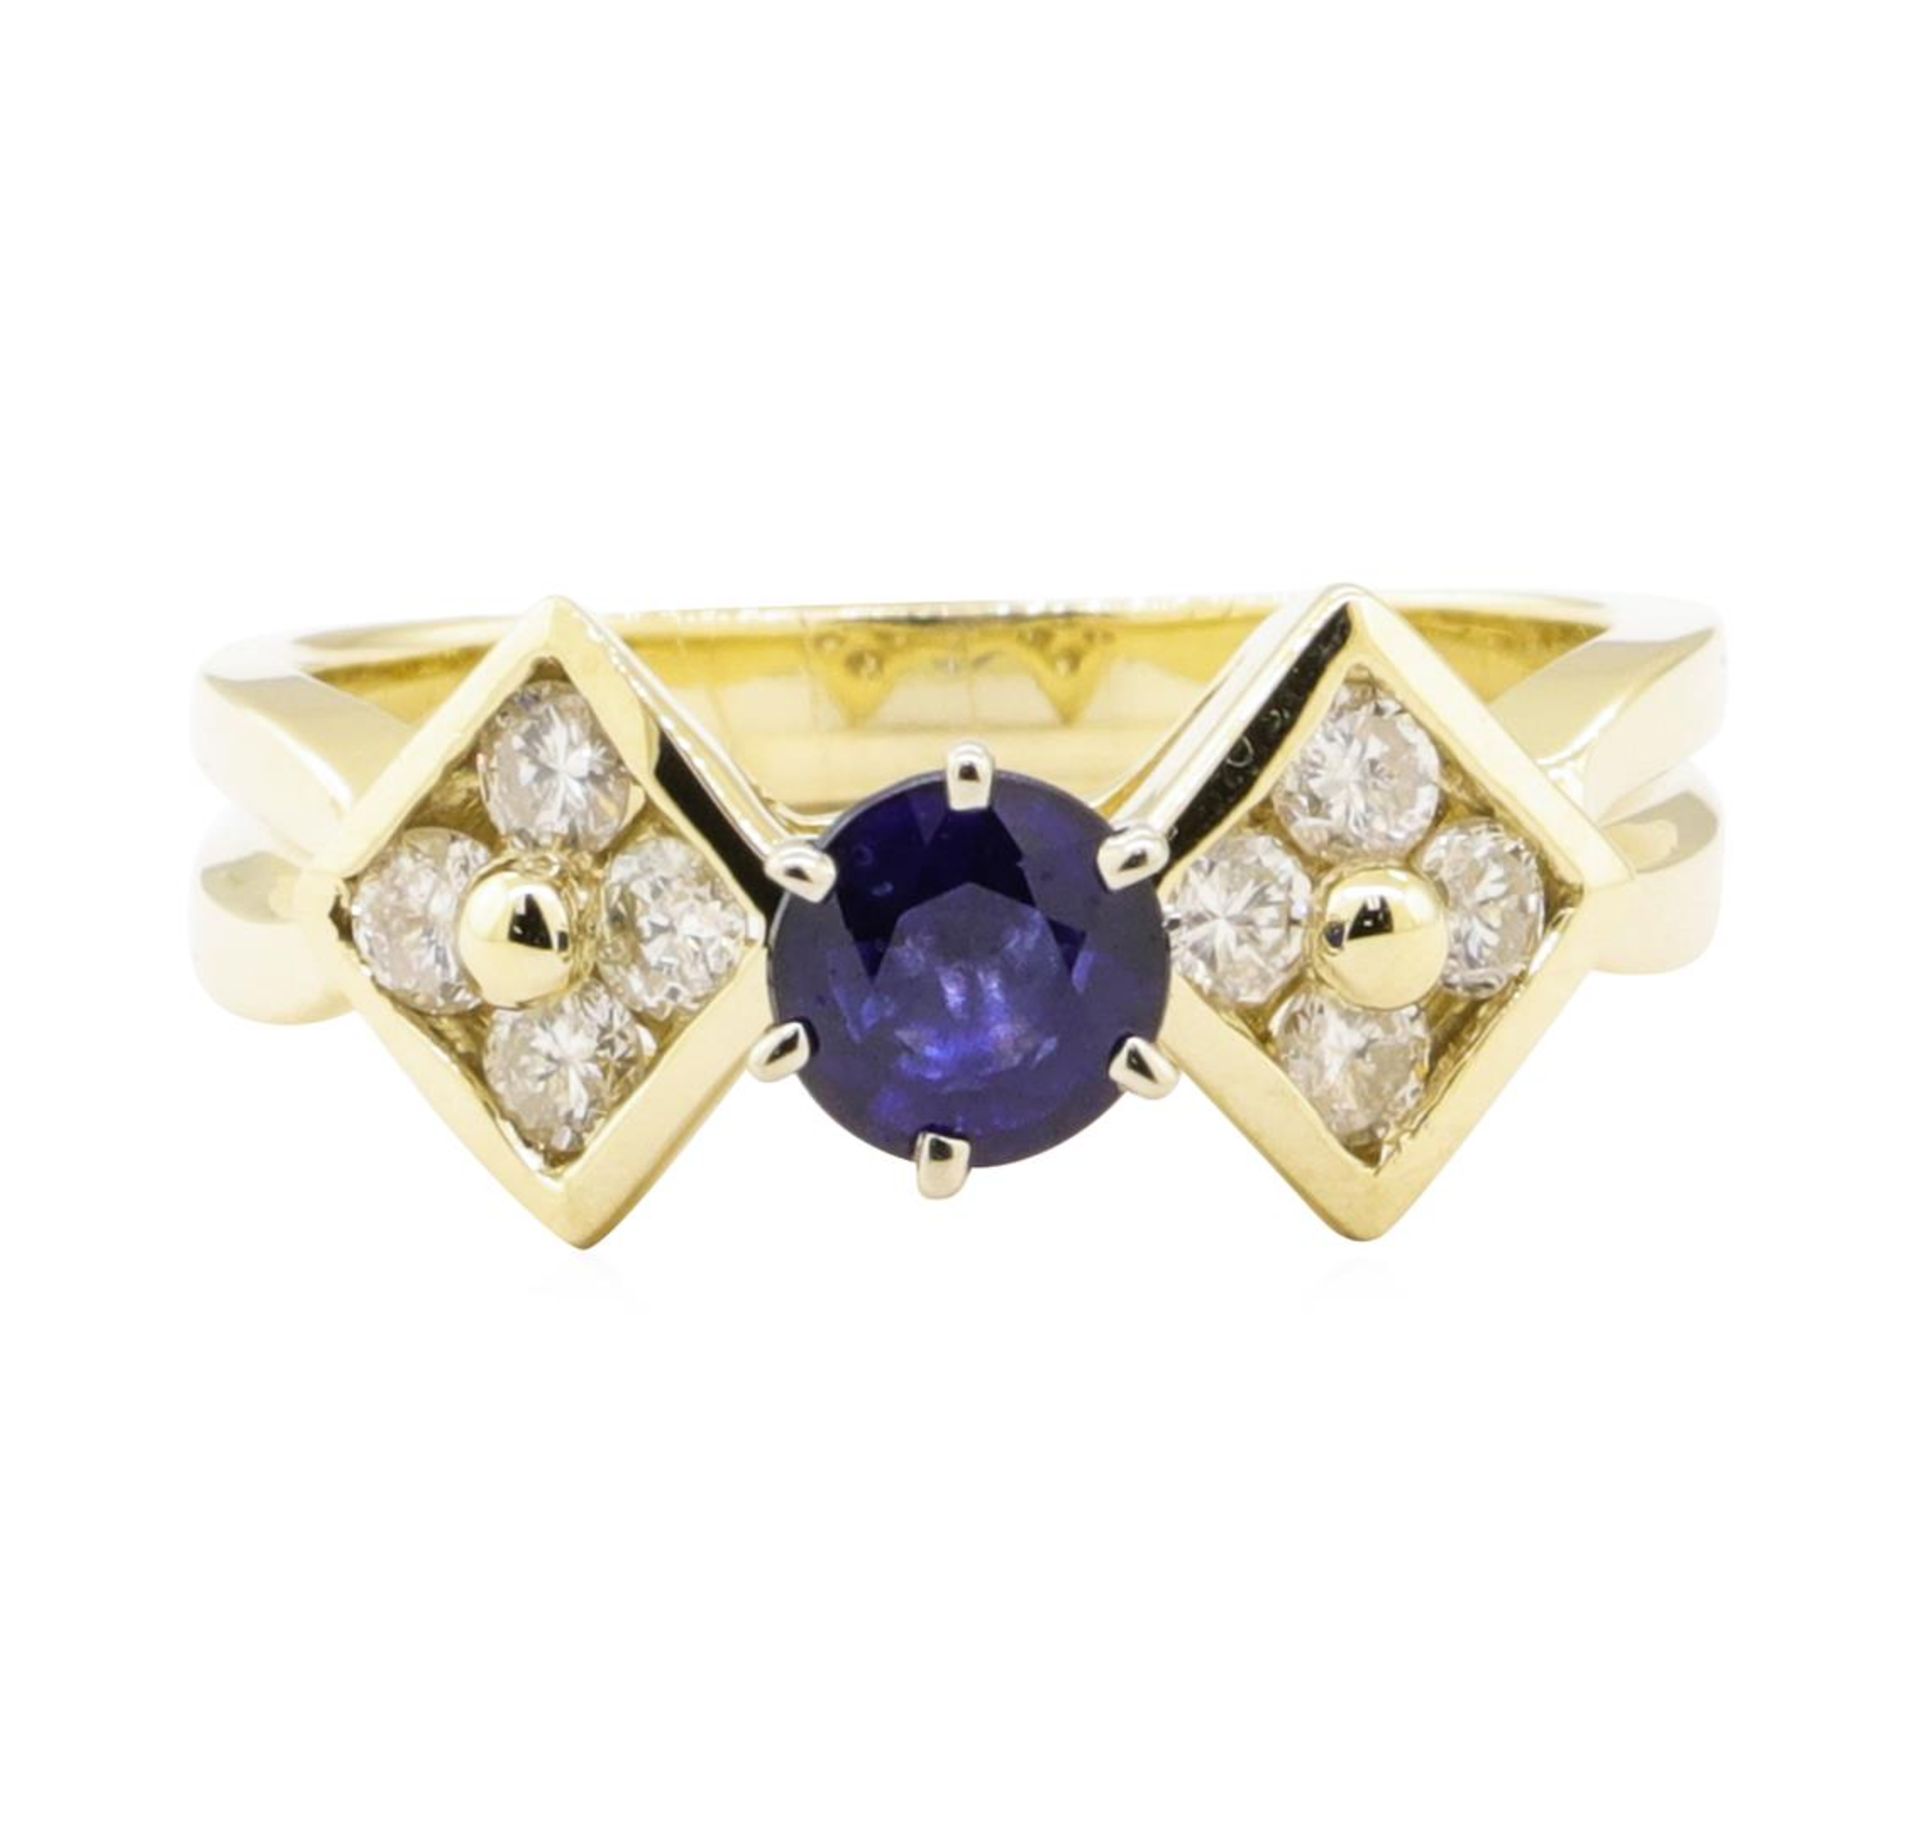 1.02 ctw Blue Sapphire and Diamond Ring - 14KT Yellow Gold - Image 2 of 4